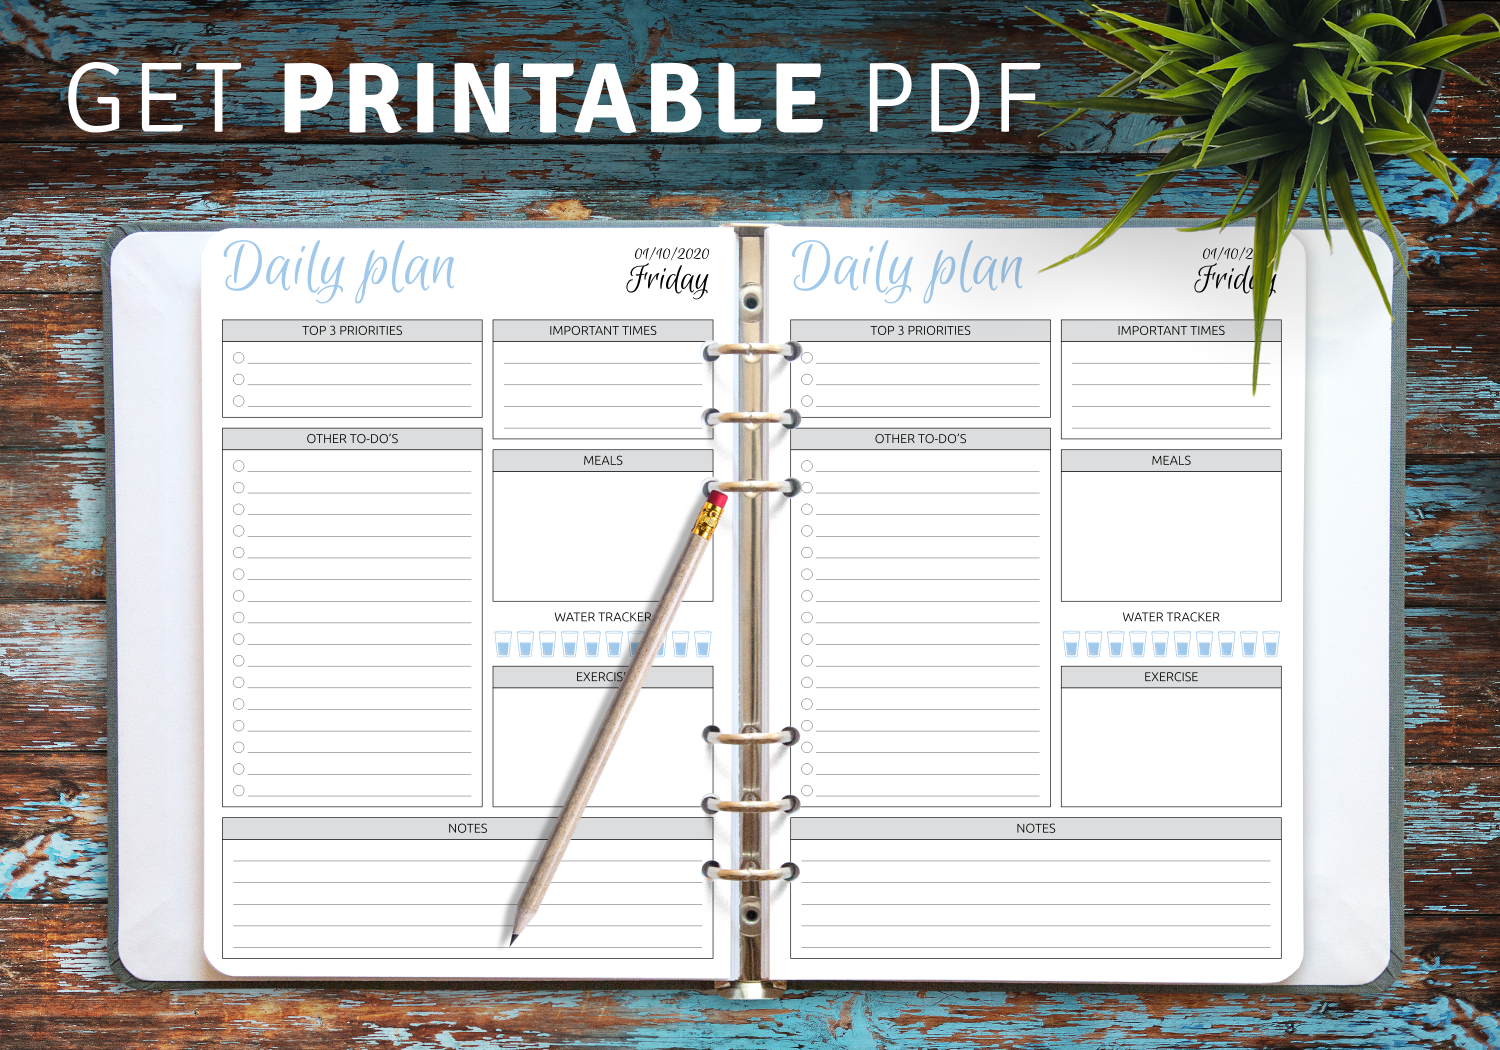 Daily Planner Printable, Productivity Planner, Daily to Do List